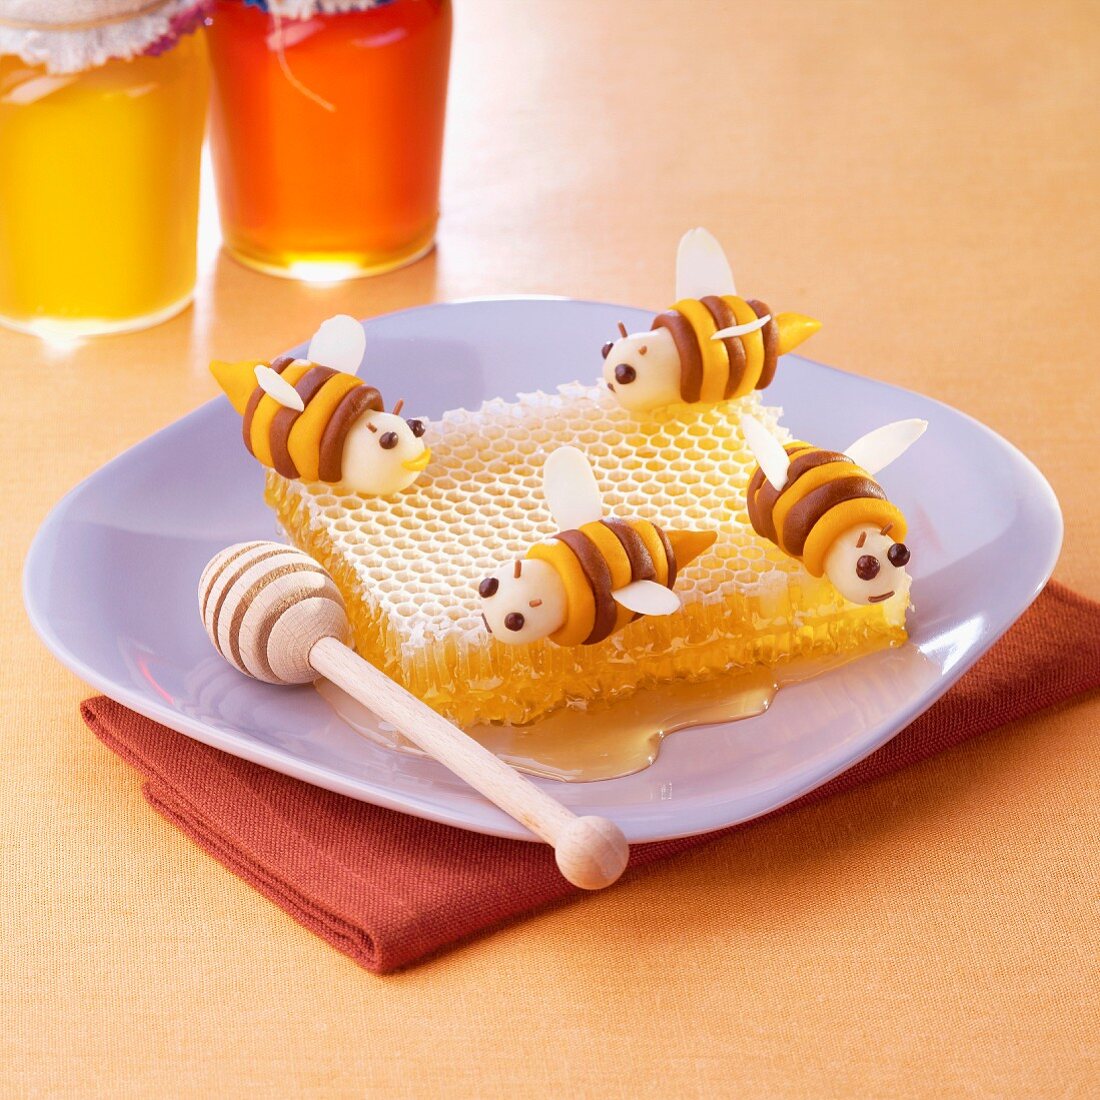 Almond paste bees on a honeycomb